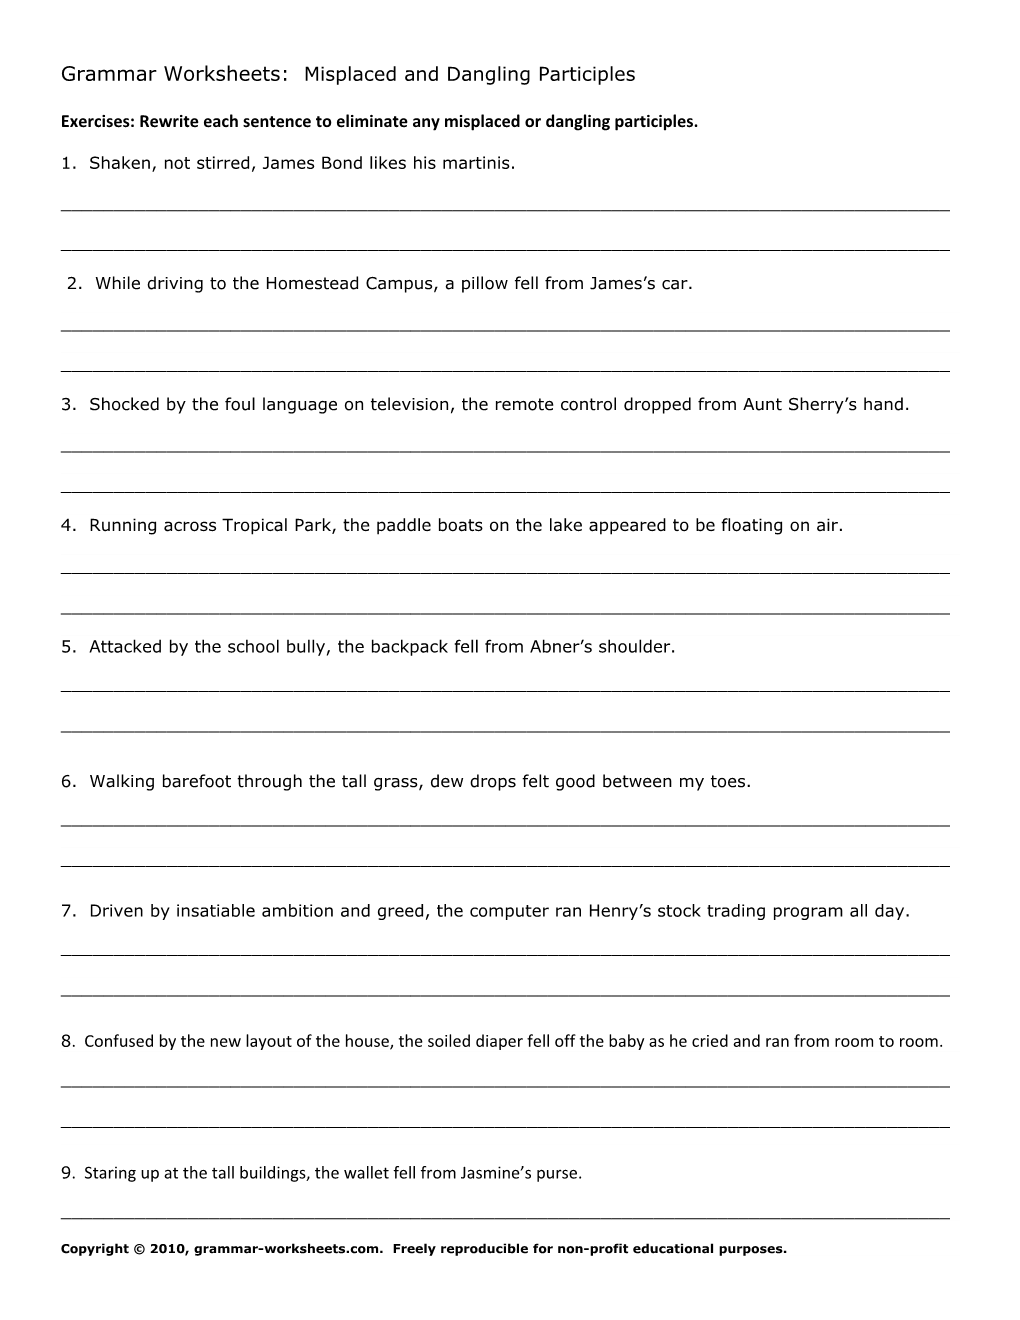 Grammar Worksheets: Misplaced and Dangling Participles